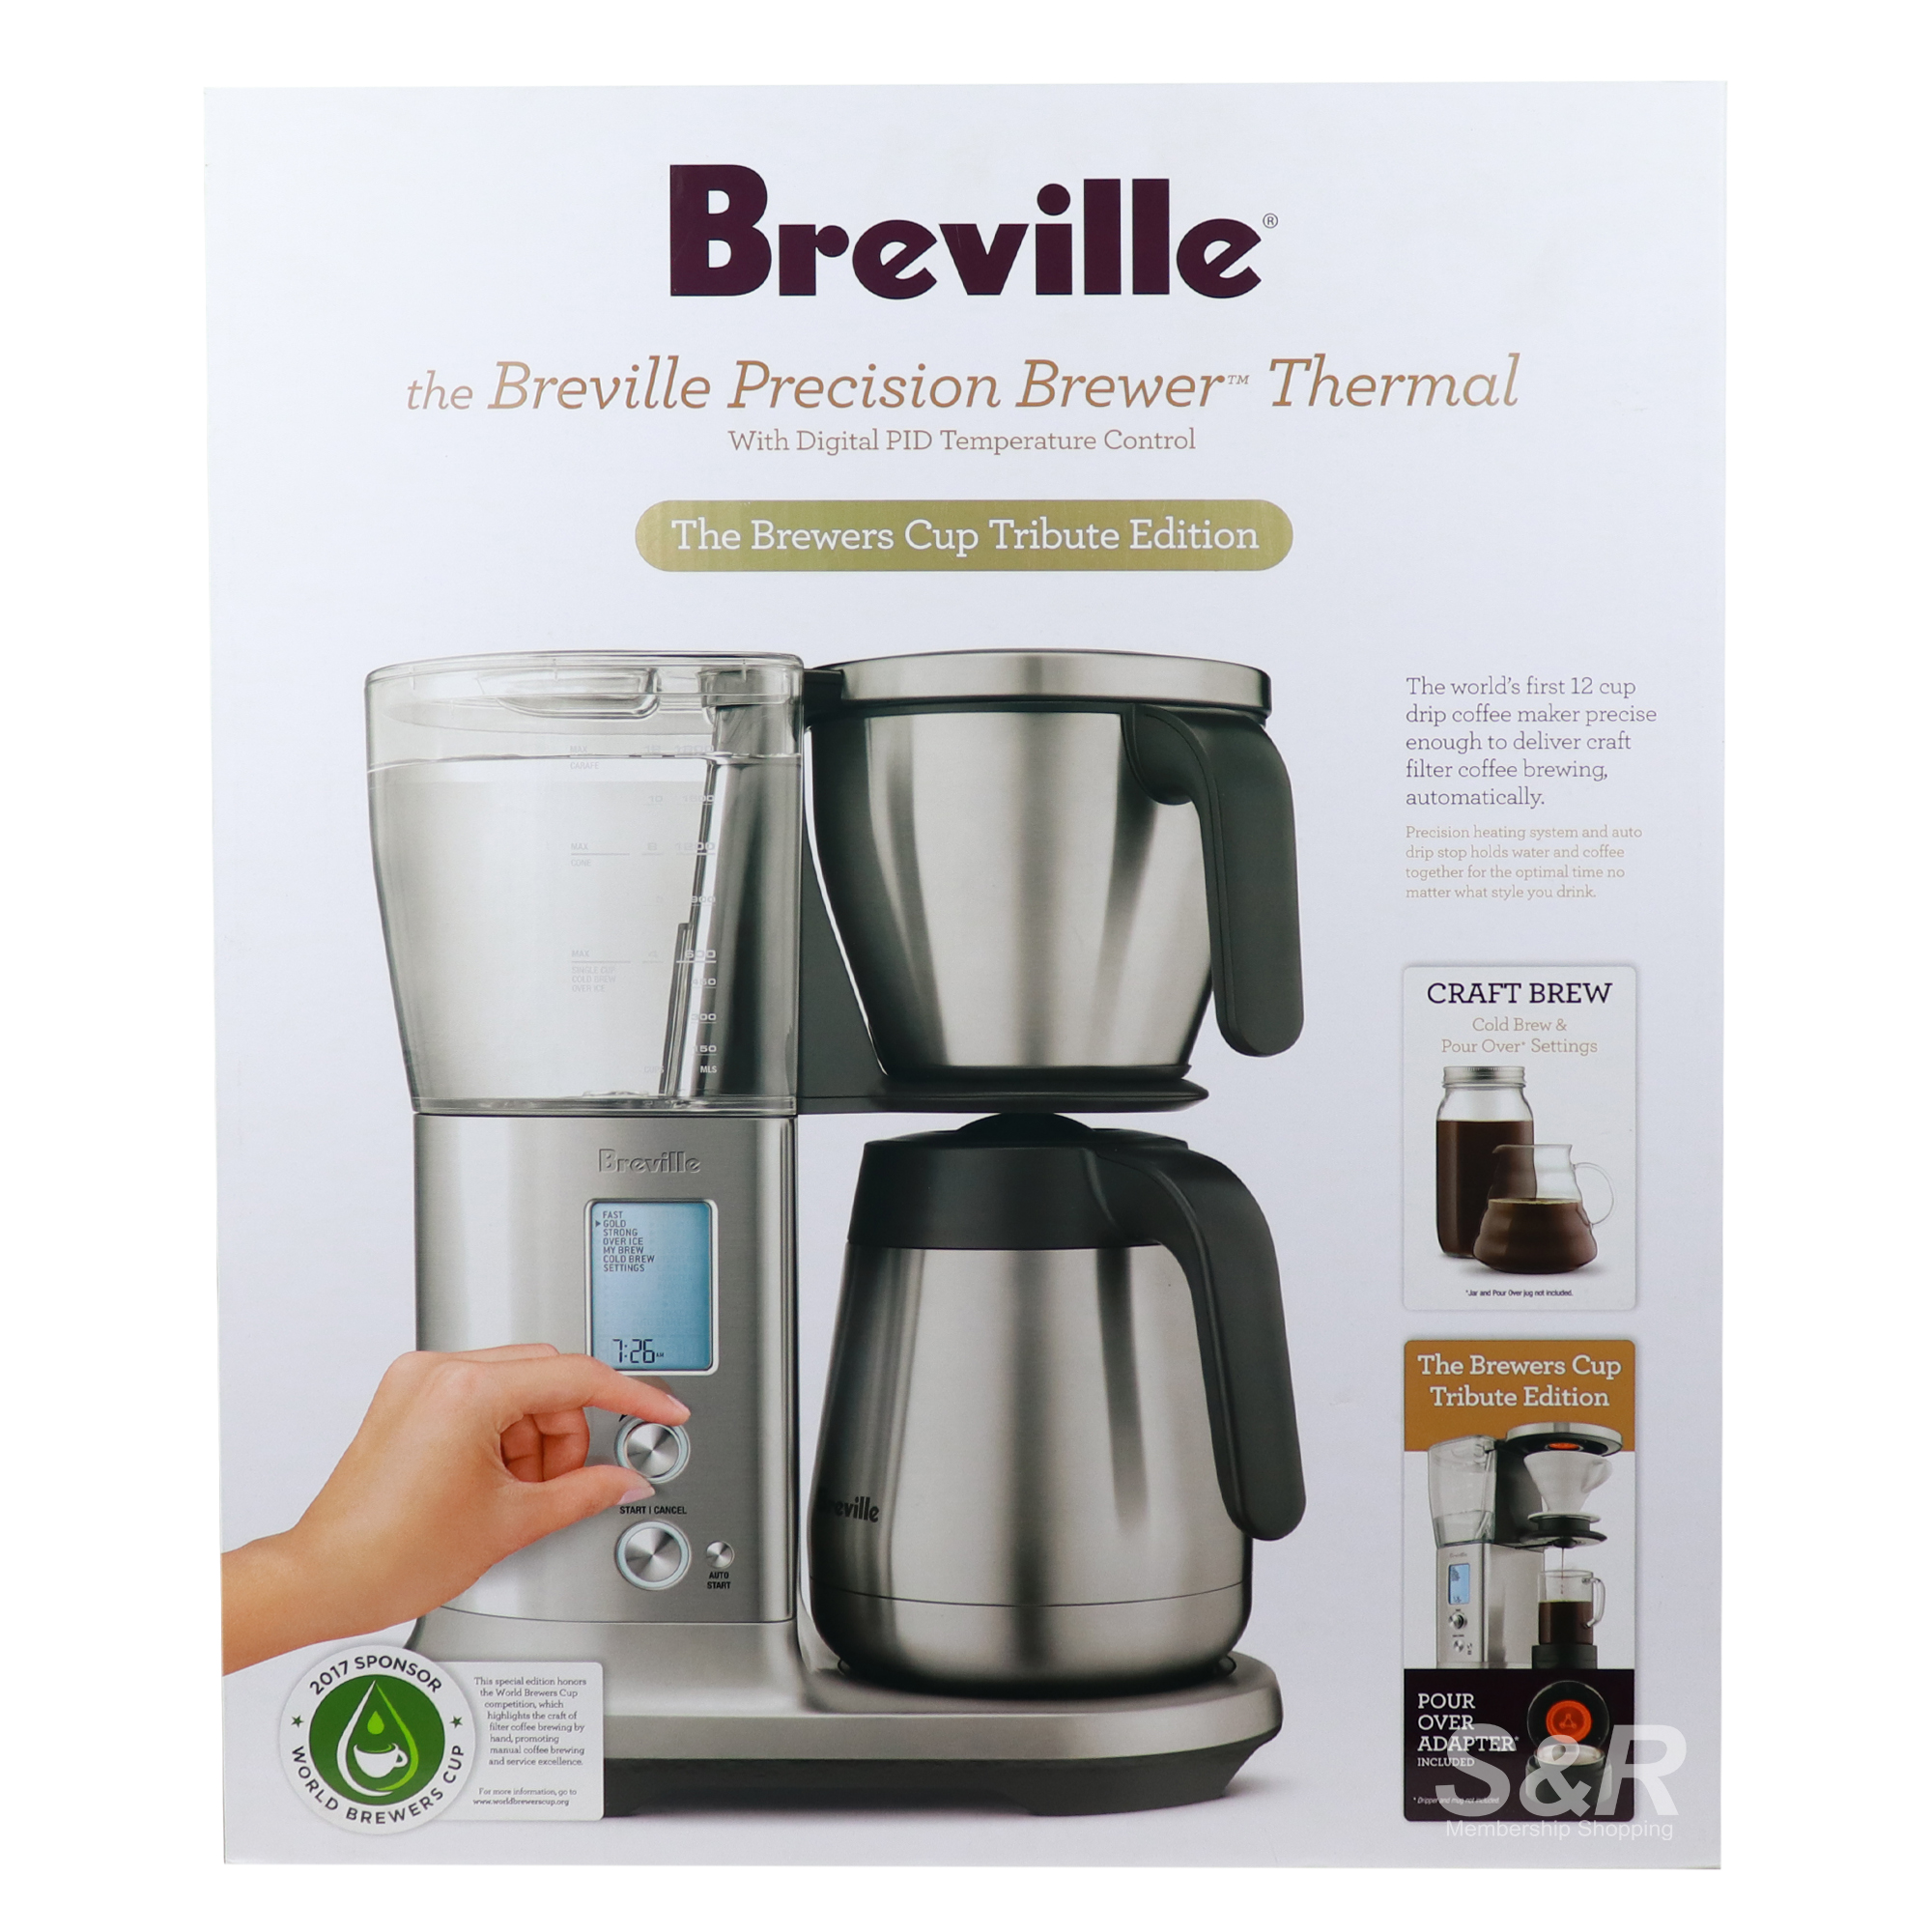 https://www.snrshopping.com/upload/product/Breville-the-Breville-Precision-Brewer-Thermal-BDC455BSS-3828/Breville%20the%20Breville%20Precision%20Brewer%20Thermal%20BDC455BSS-MkObRoGR01.jpg